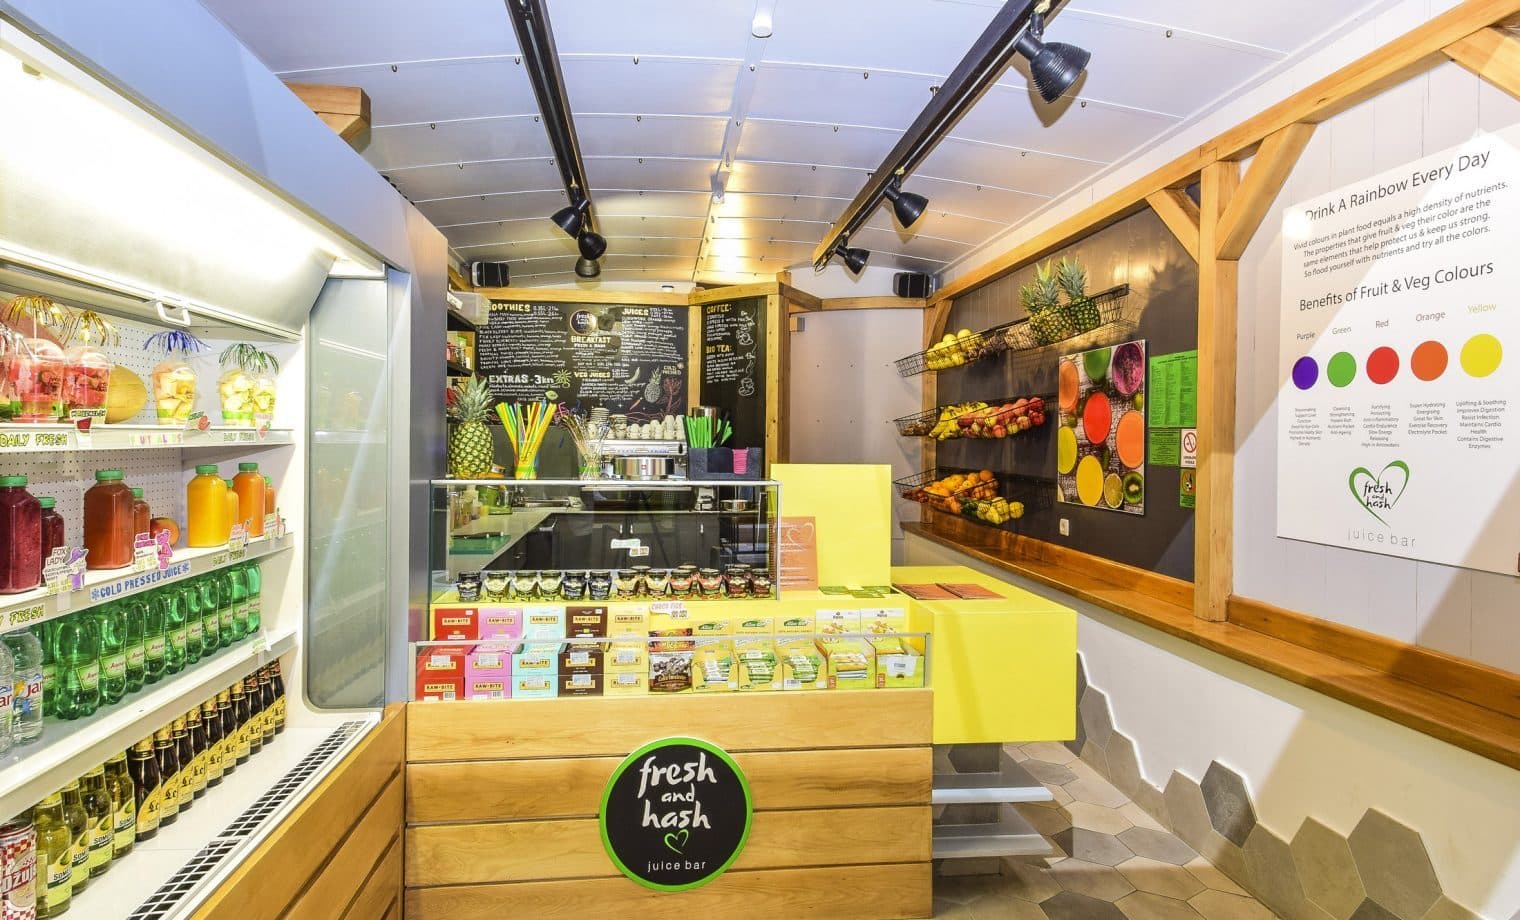 The Most Beautiful Interior Designs of Fruit Juice Shop The